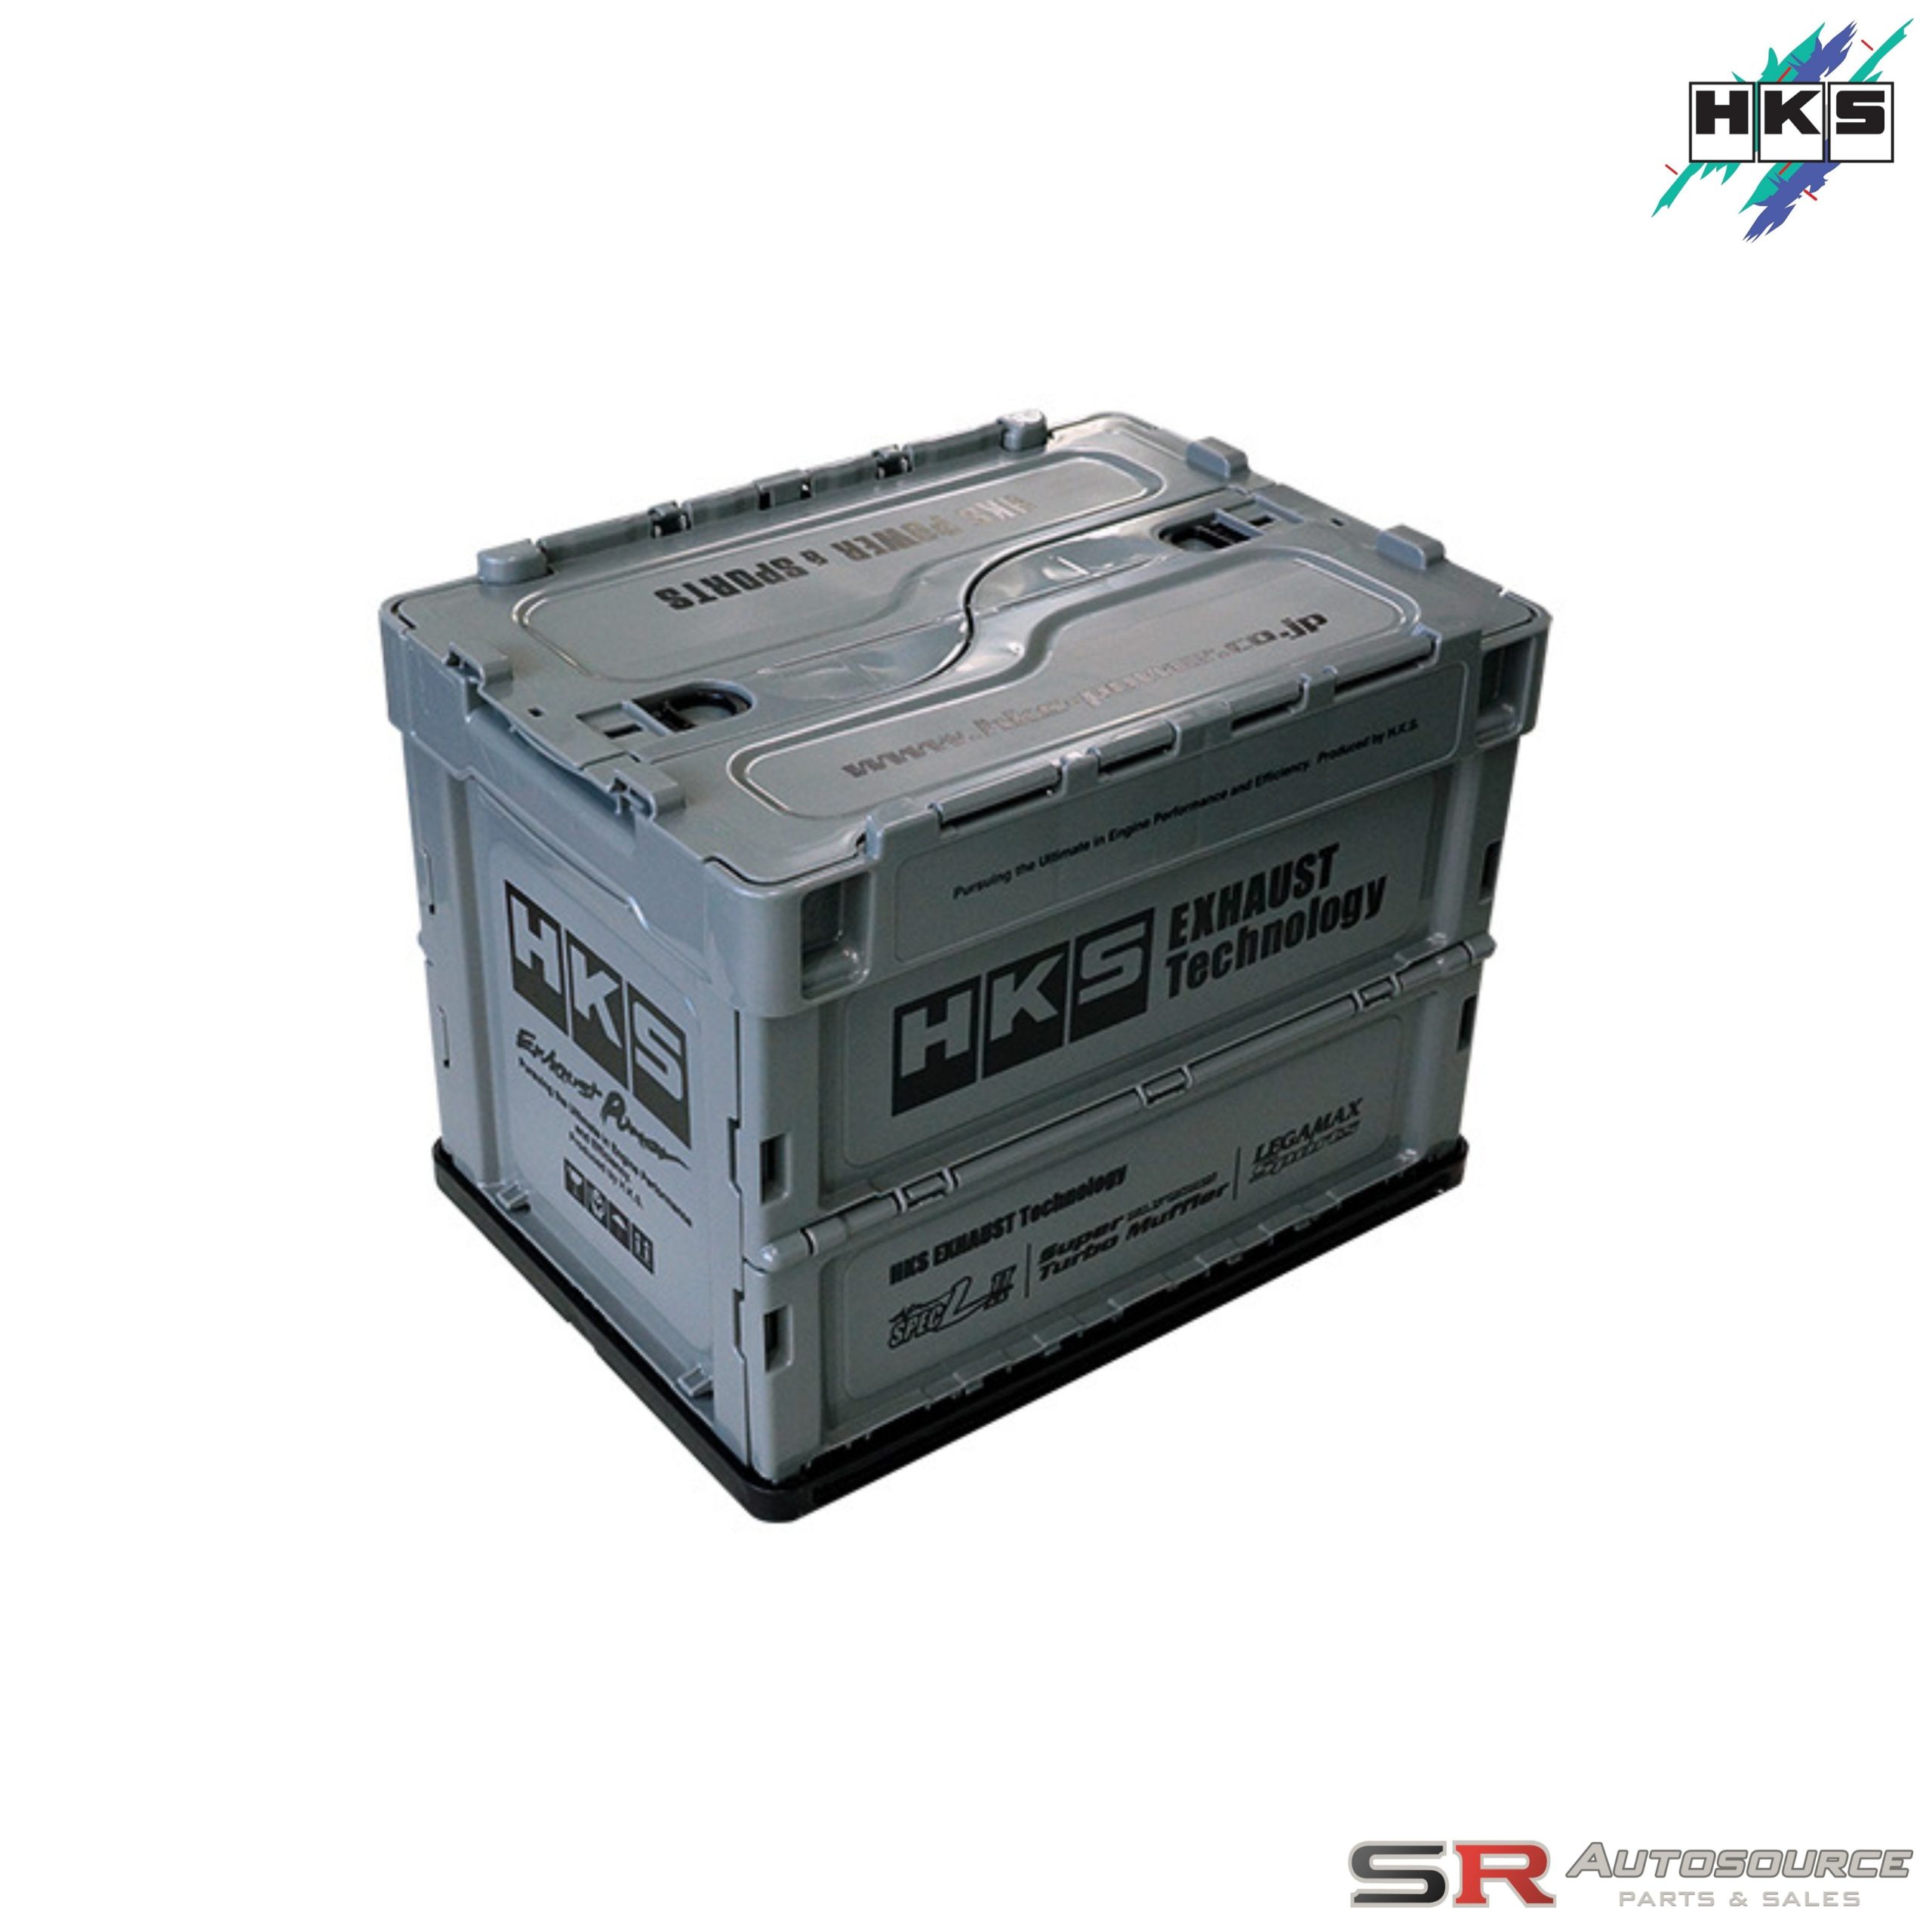 HKS Limited Edition Container Box – Grey